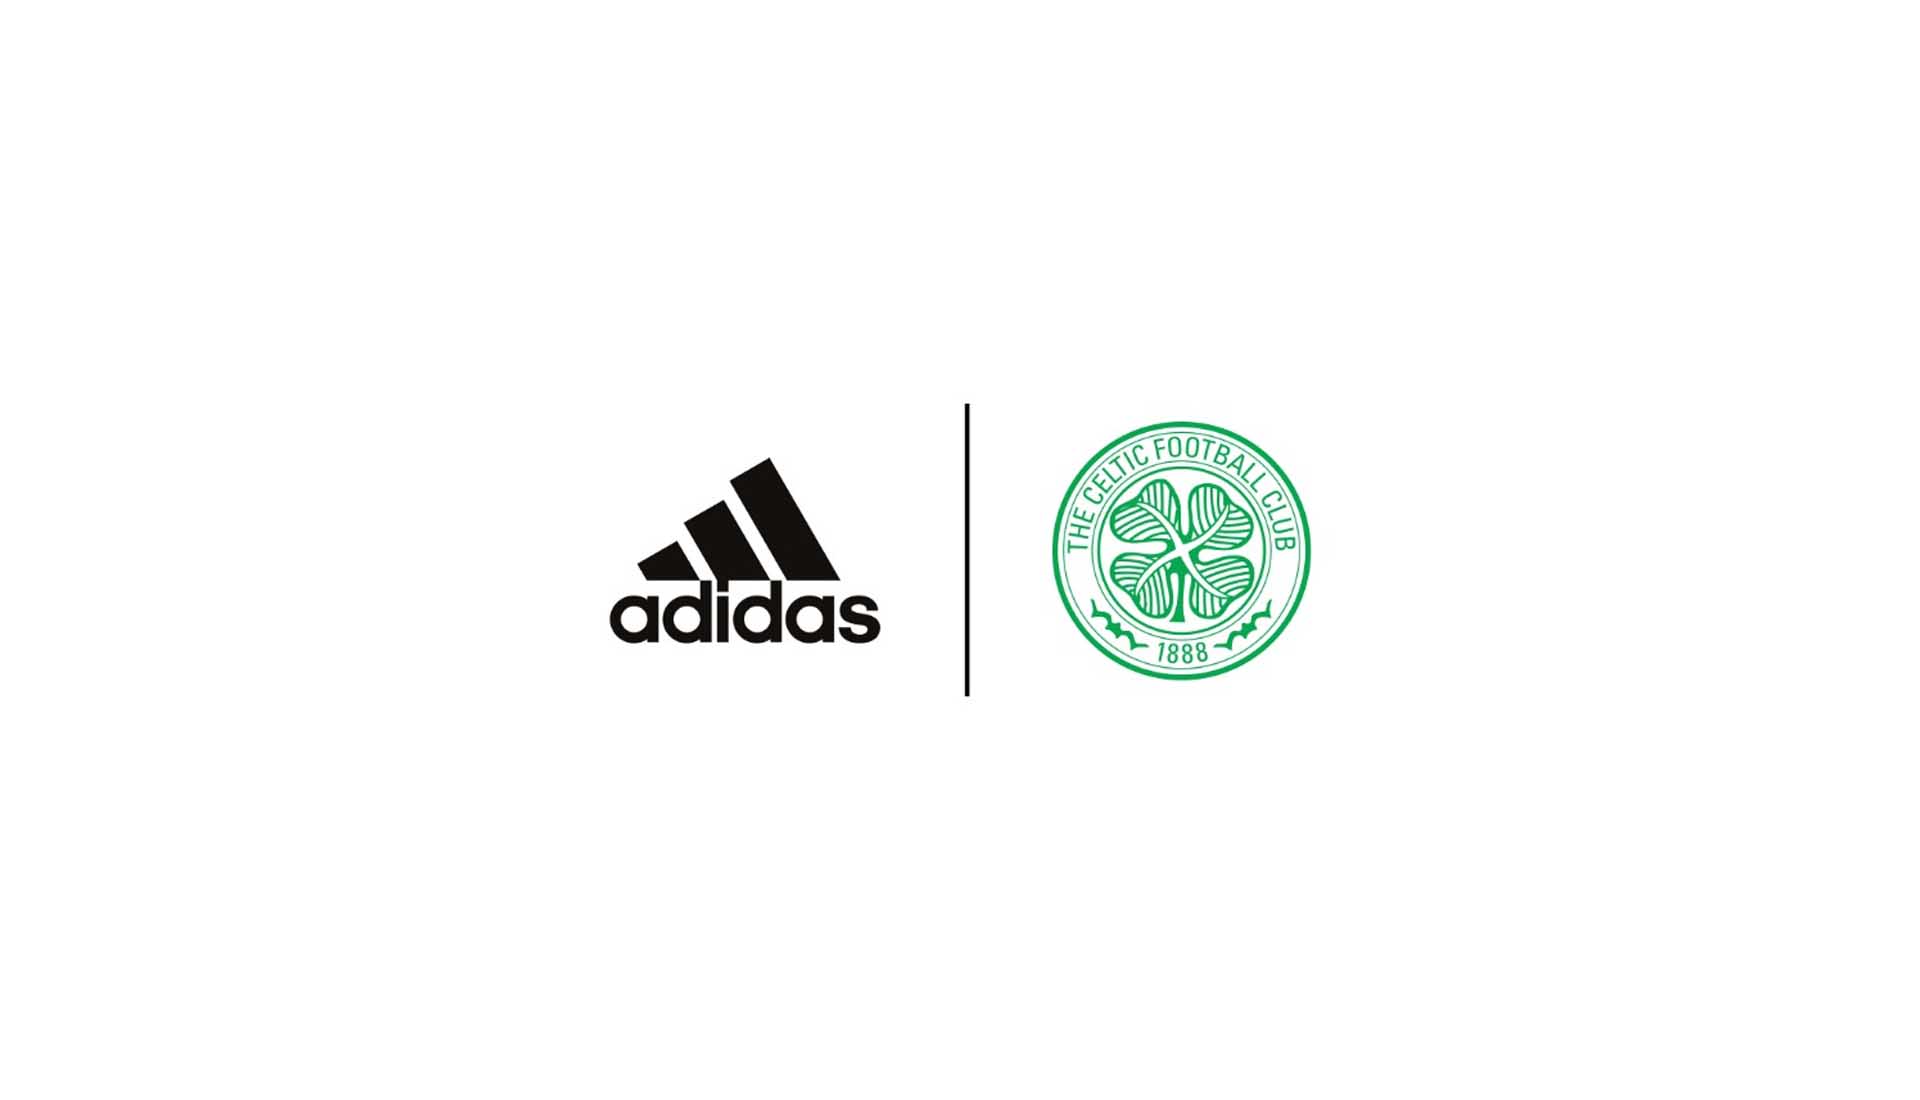 Celtic's Adidas kit launch date details revealed as New Balance